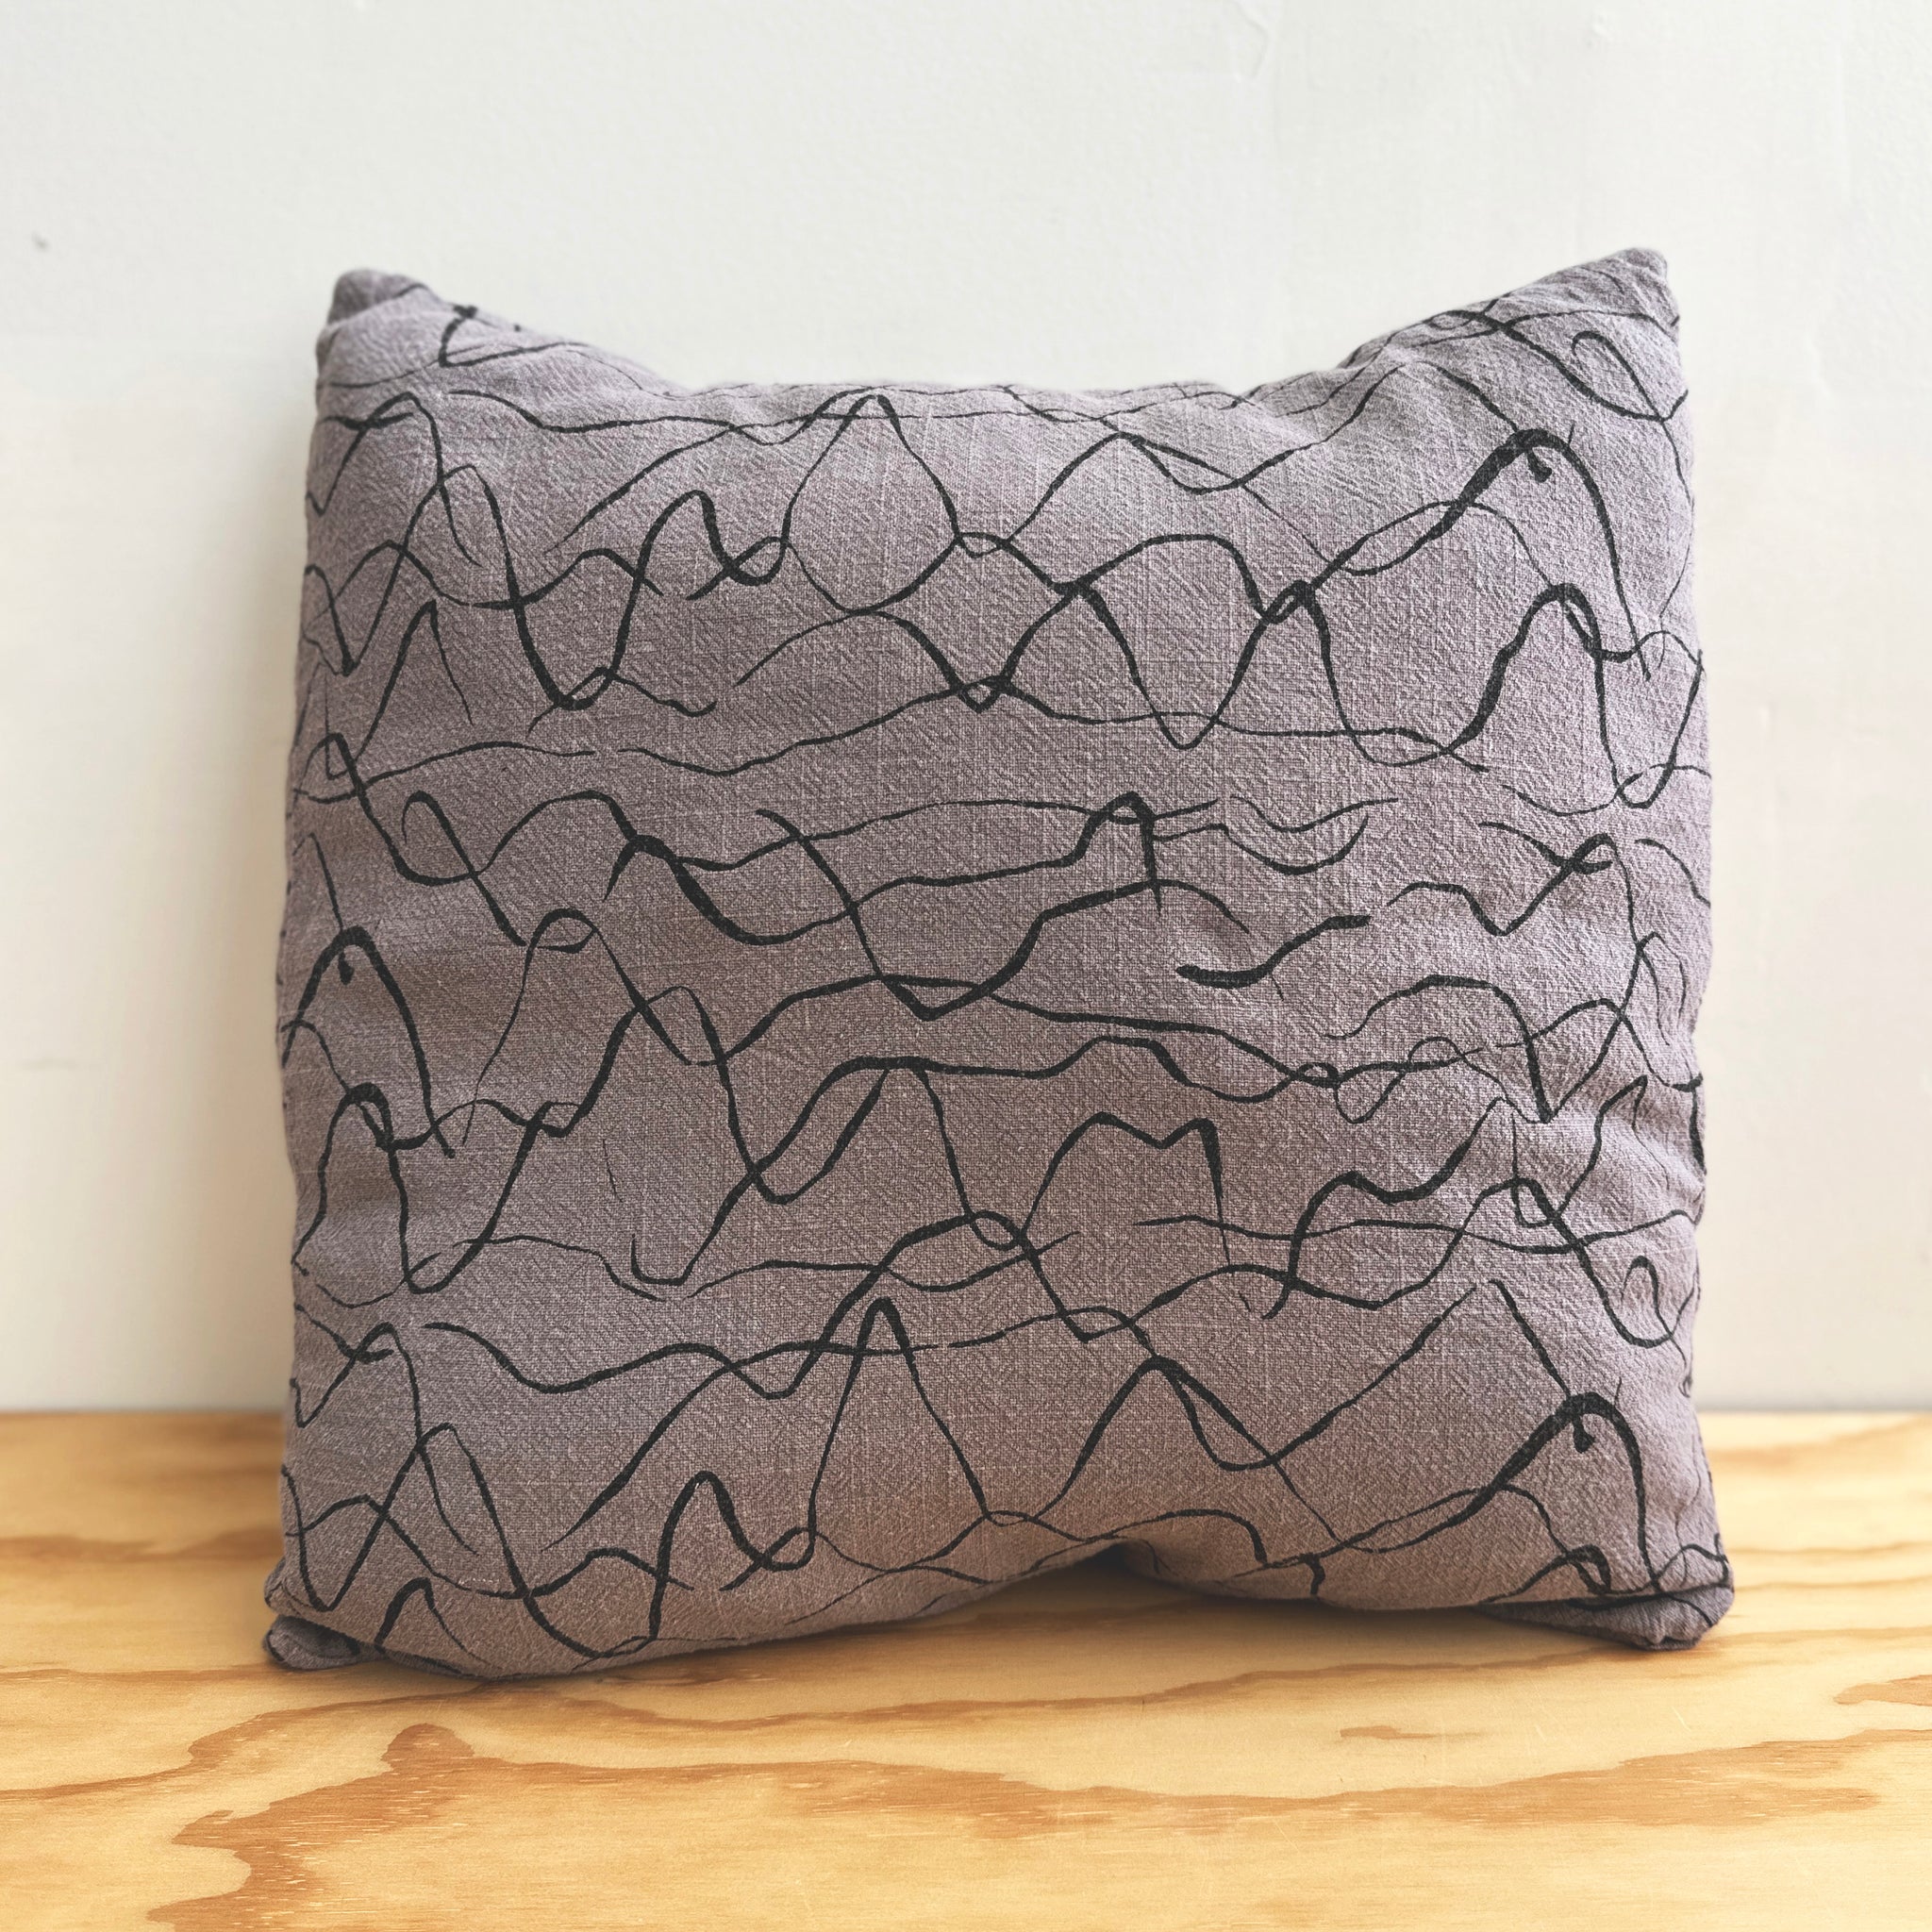 The Square Throw Pillow - Weave in Mulch and Walnut